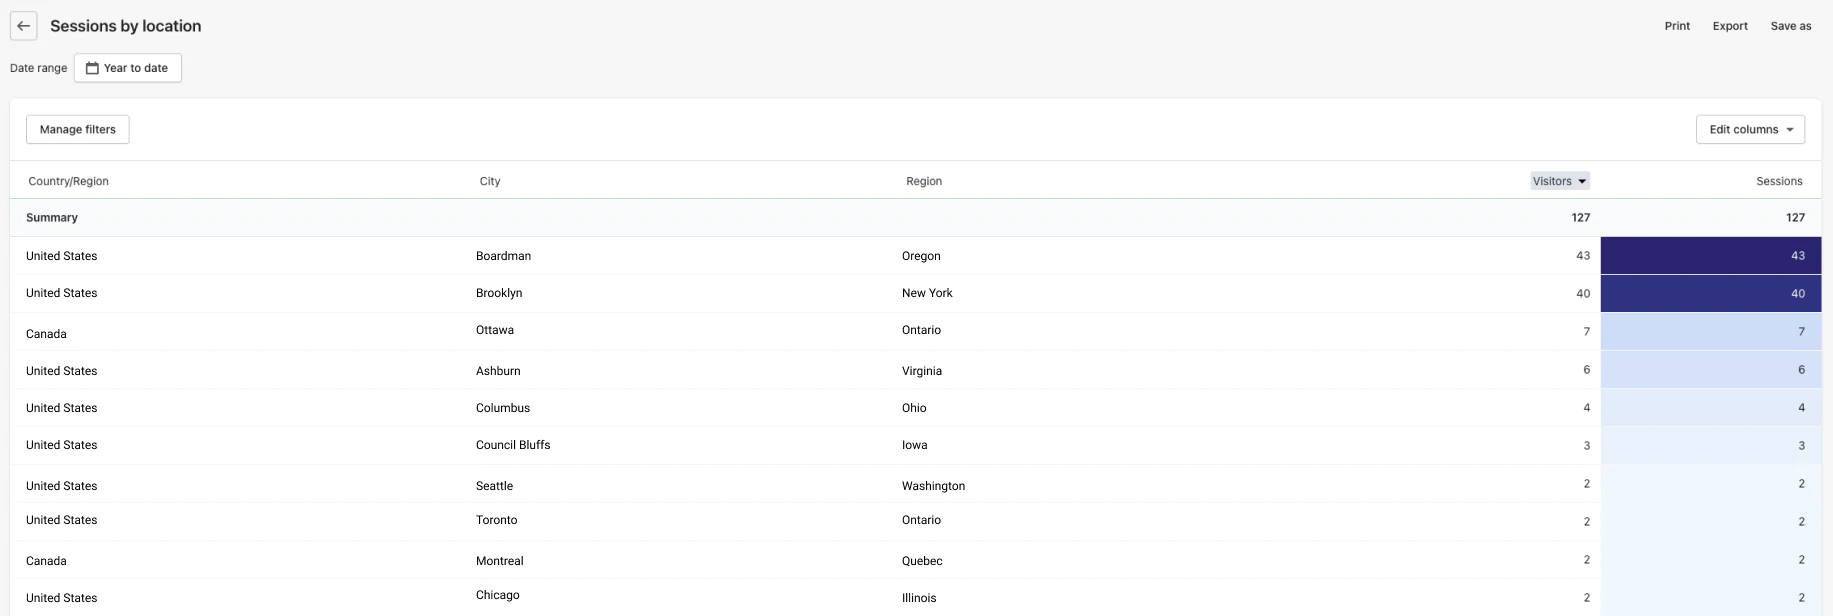 A screenshot of a Shopify report showing sessions by location